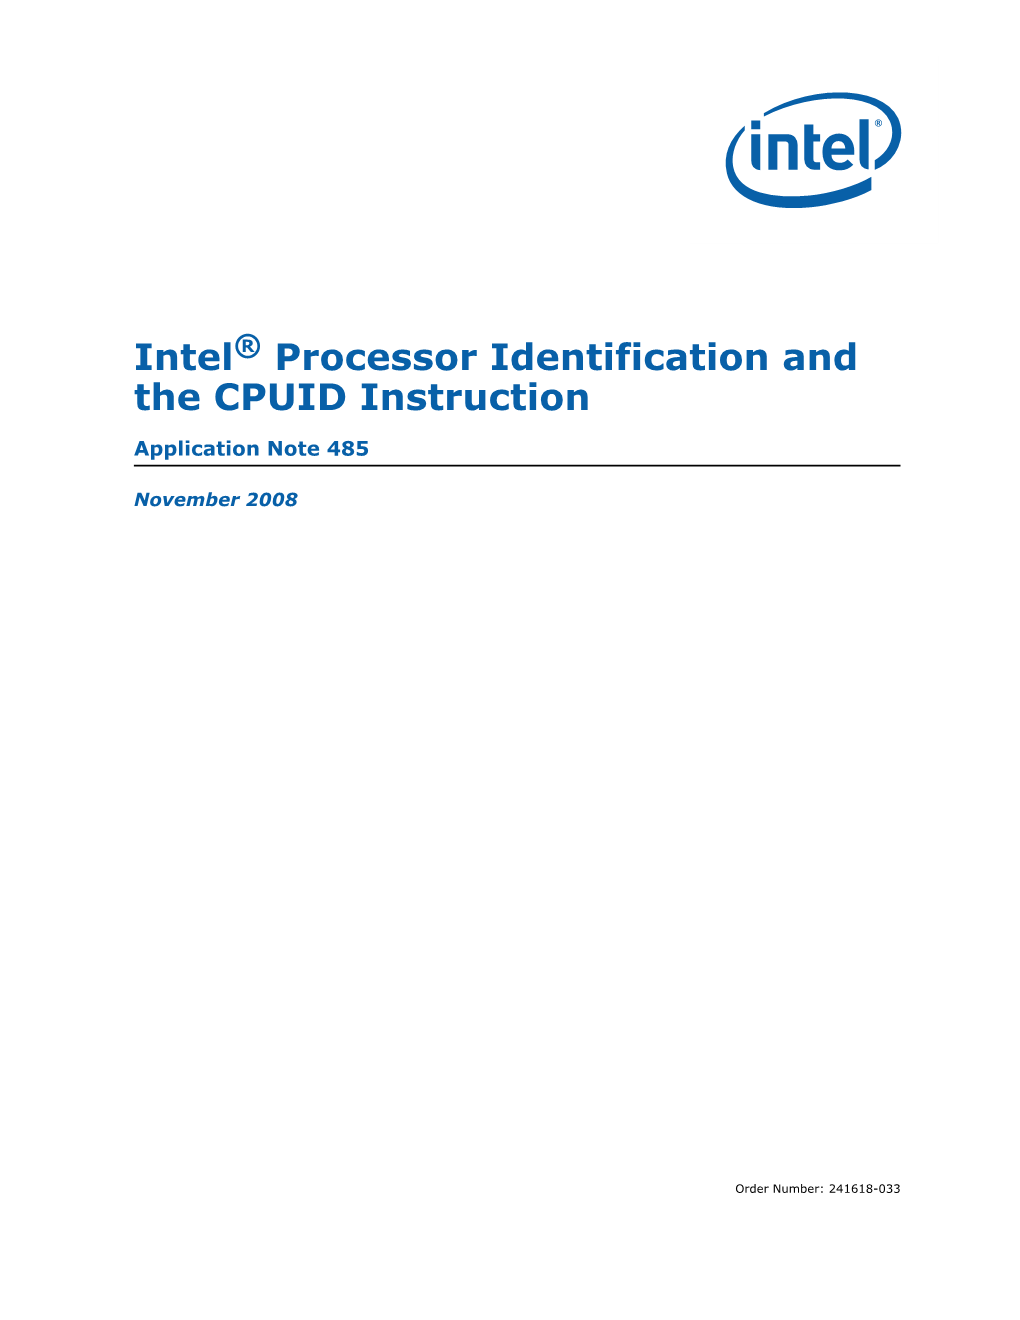 Intel Processor Identification and the CPUID Instruction